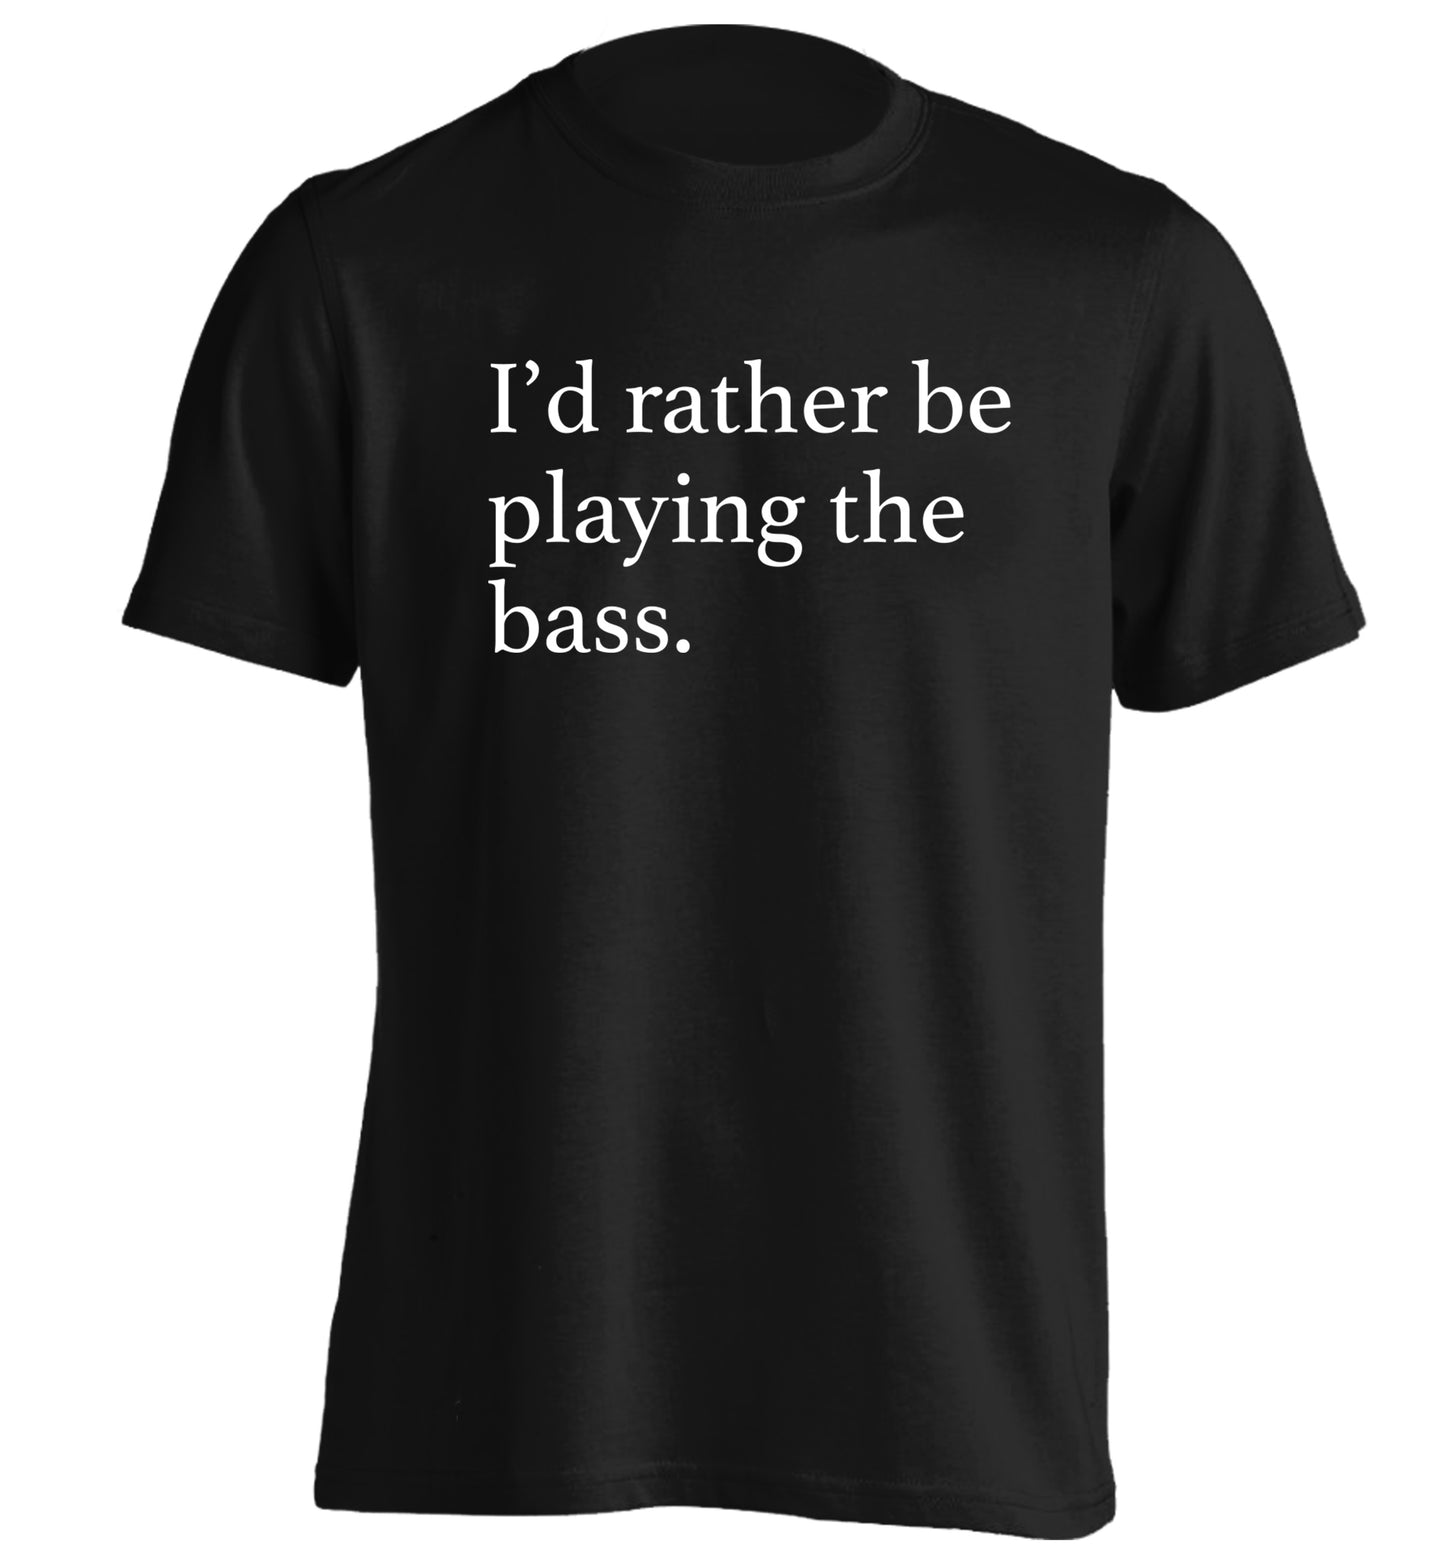 I'd rather by playing the bass adults unisex black Tshirt 2XL